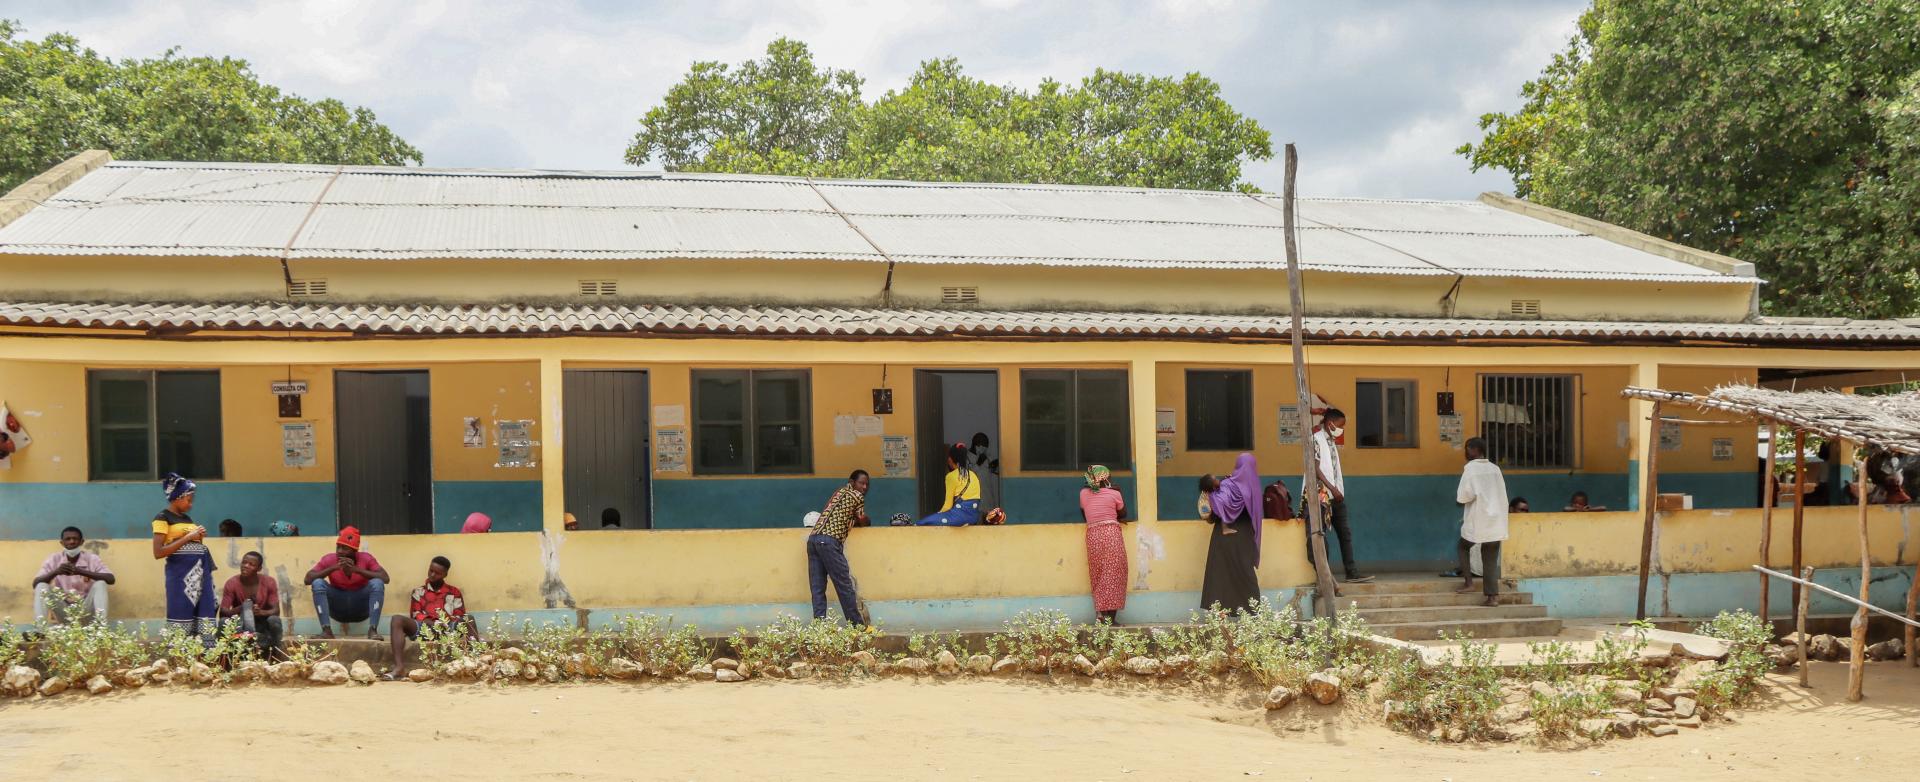 Strengthening health centres' roofs to stand against climate shocks in Mozambique